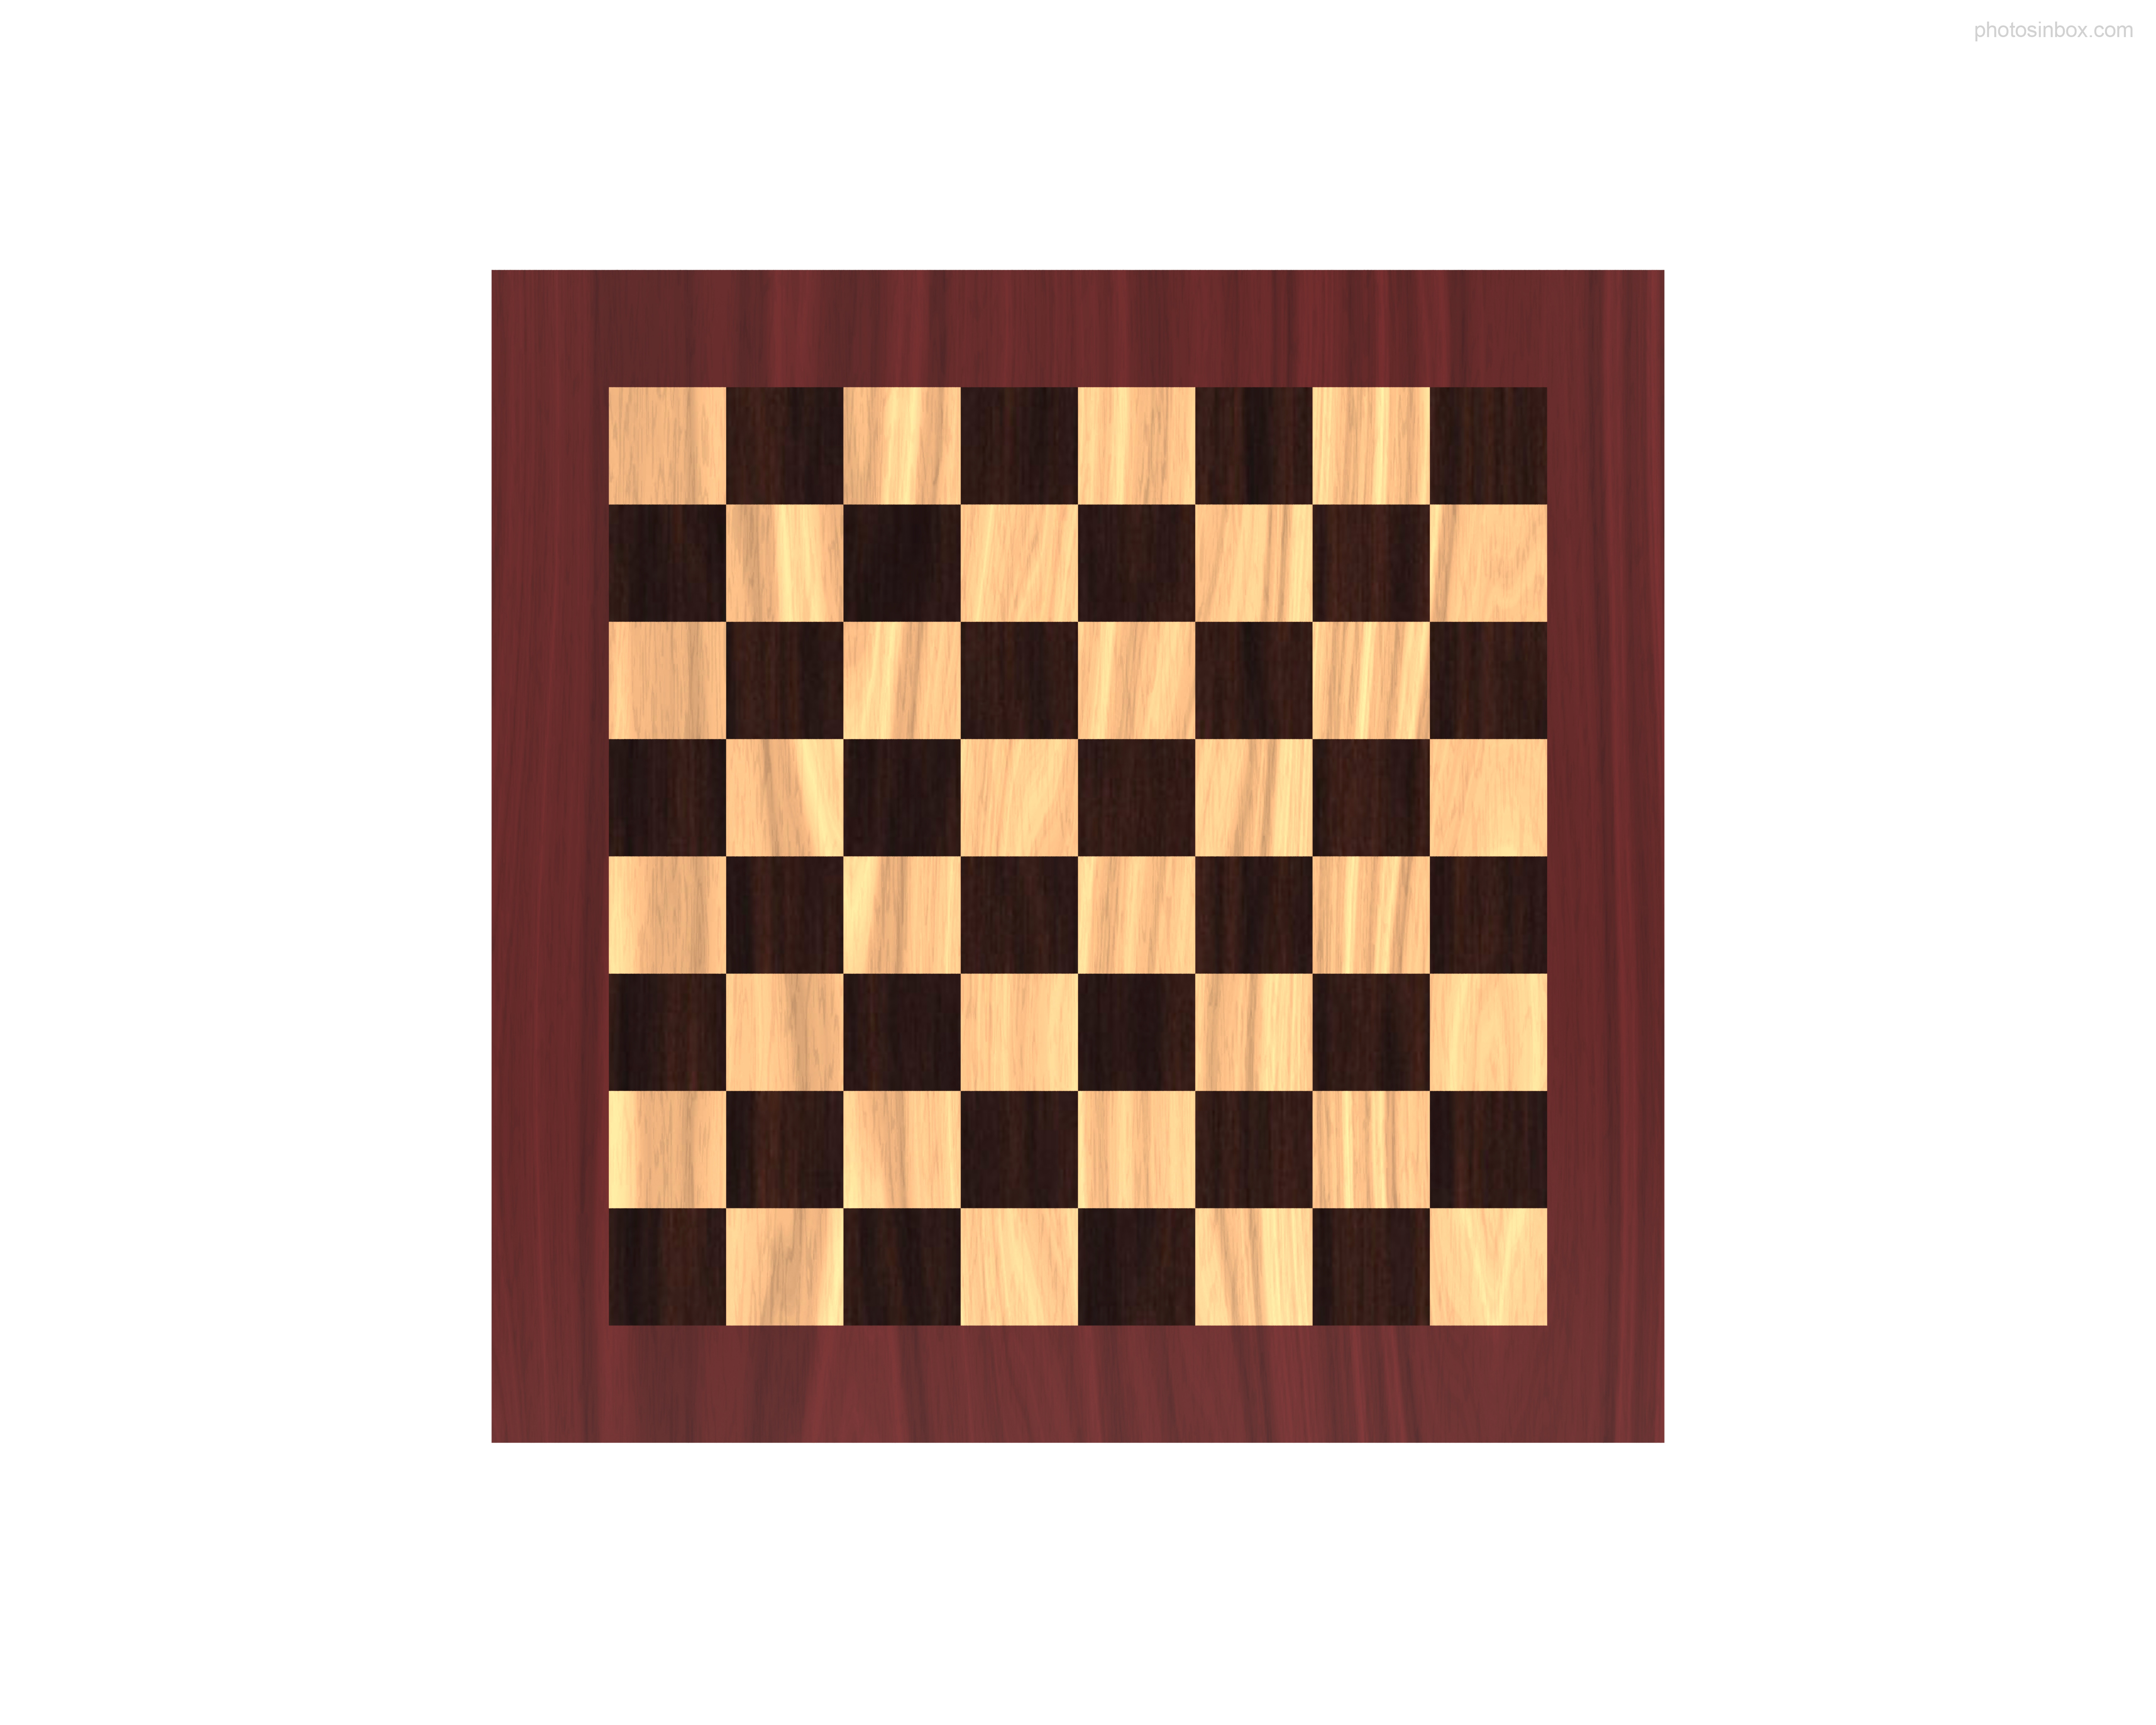 Chessboard With Pieces